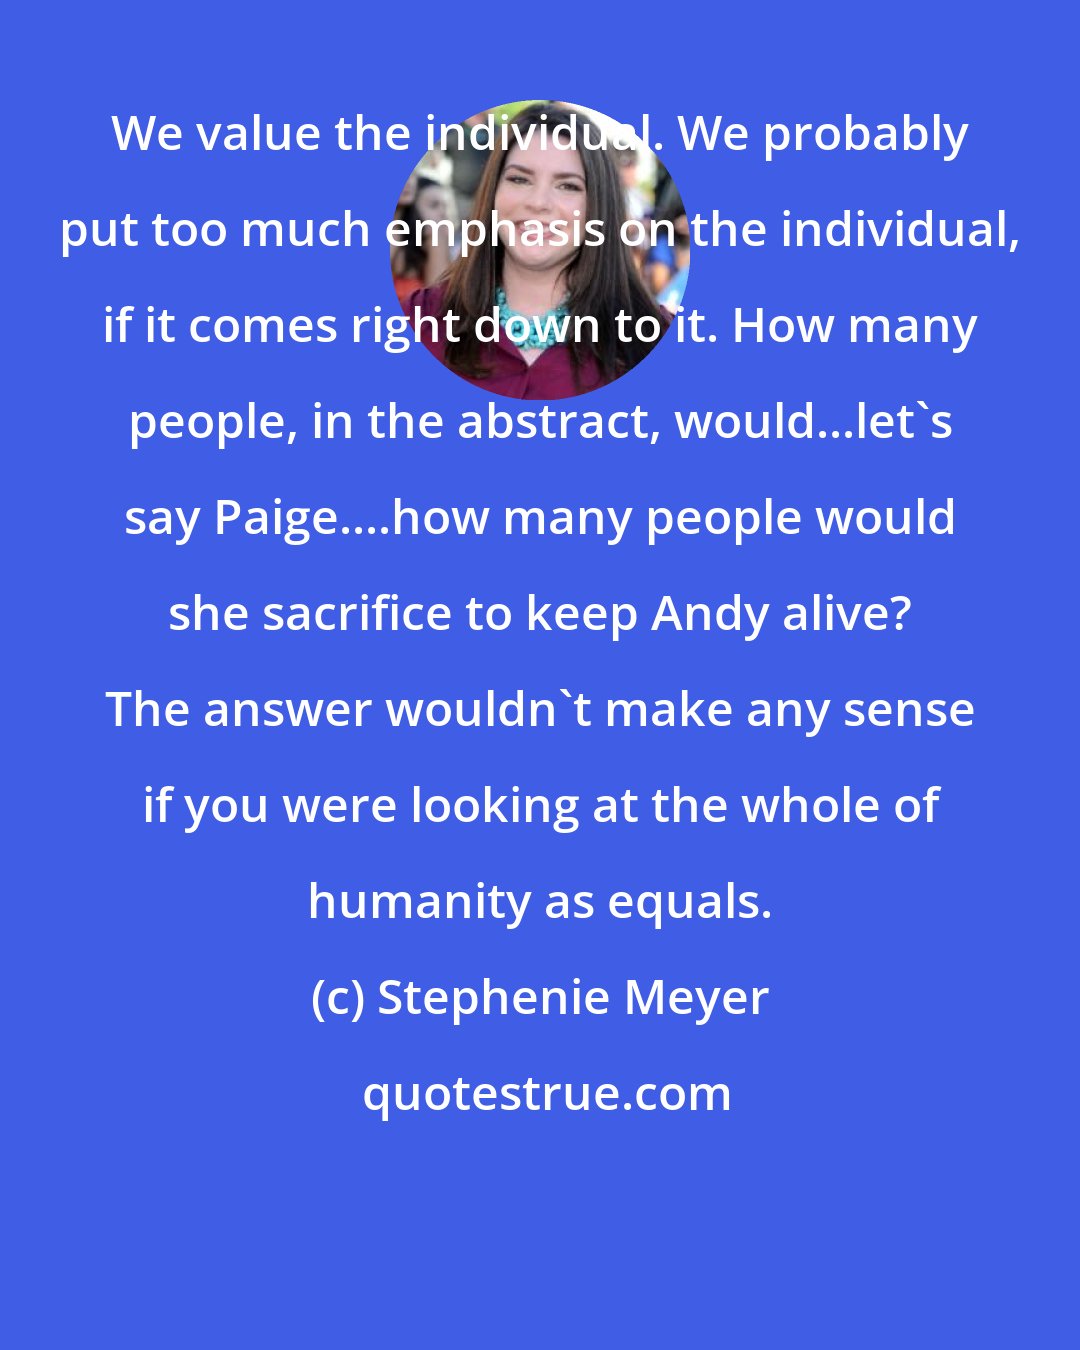 Stephenie Meyer: We value the individual. We probably put too much emphasis on the individual, if it comes right down to it. How many people, in the abstract, would...let's say Paige....how many people would she sacrifice to keep Andy alive? The answer wouldn't make any sense if you were looking at the whole of humanity as equals.